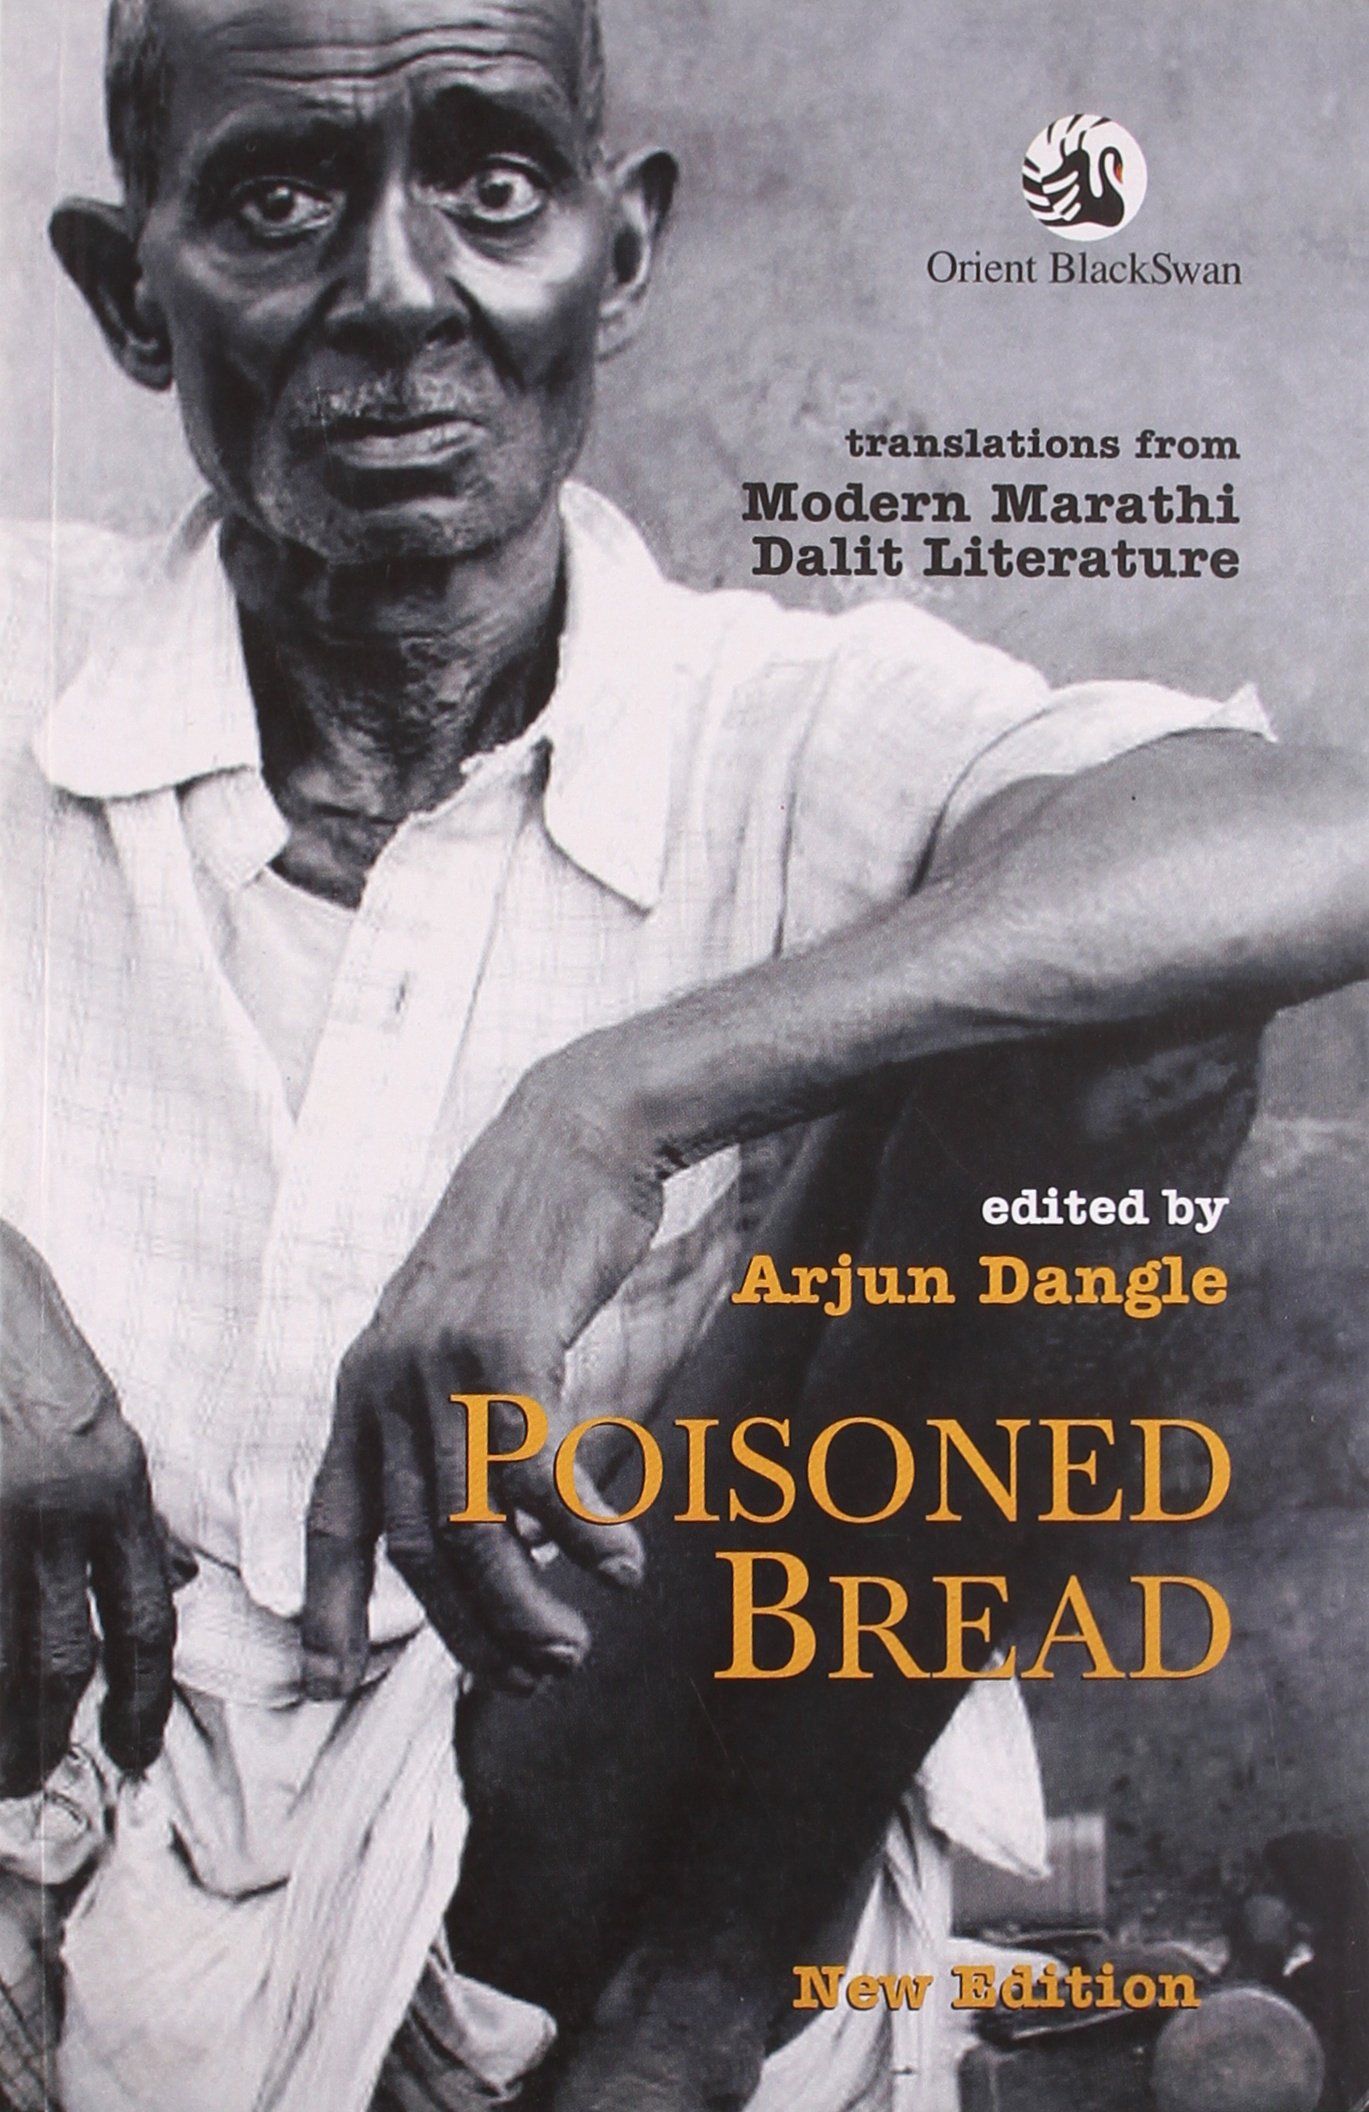 Poisoned Bread by Arjun Dangle book cover